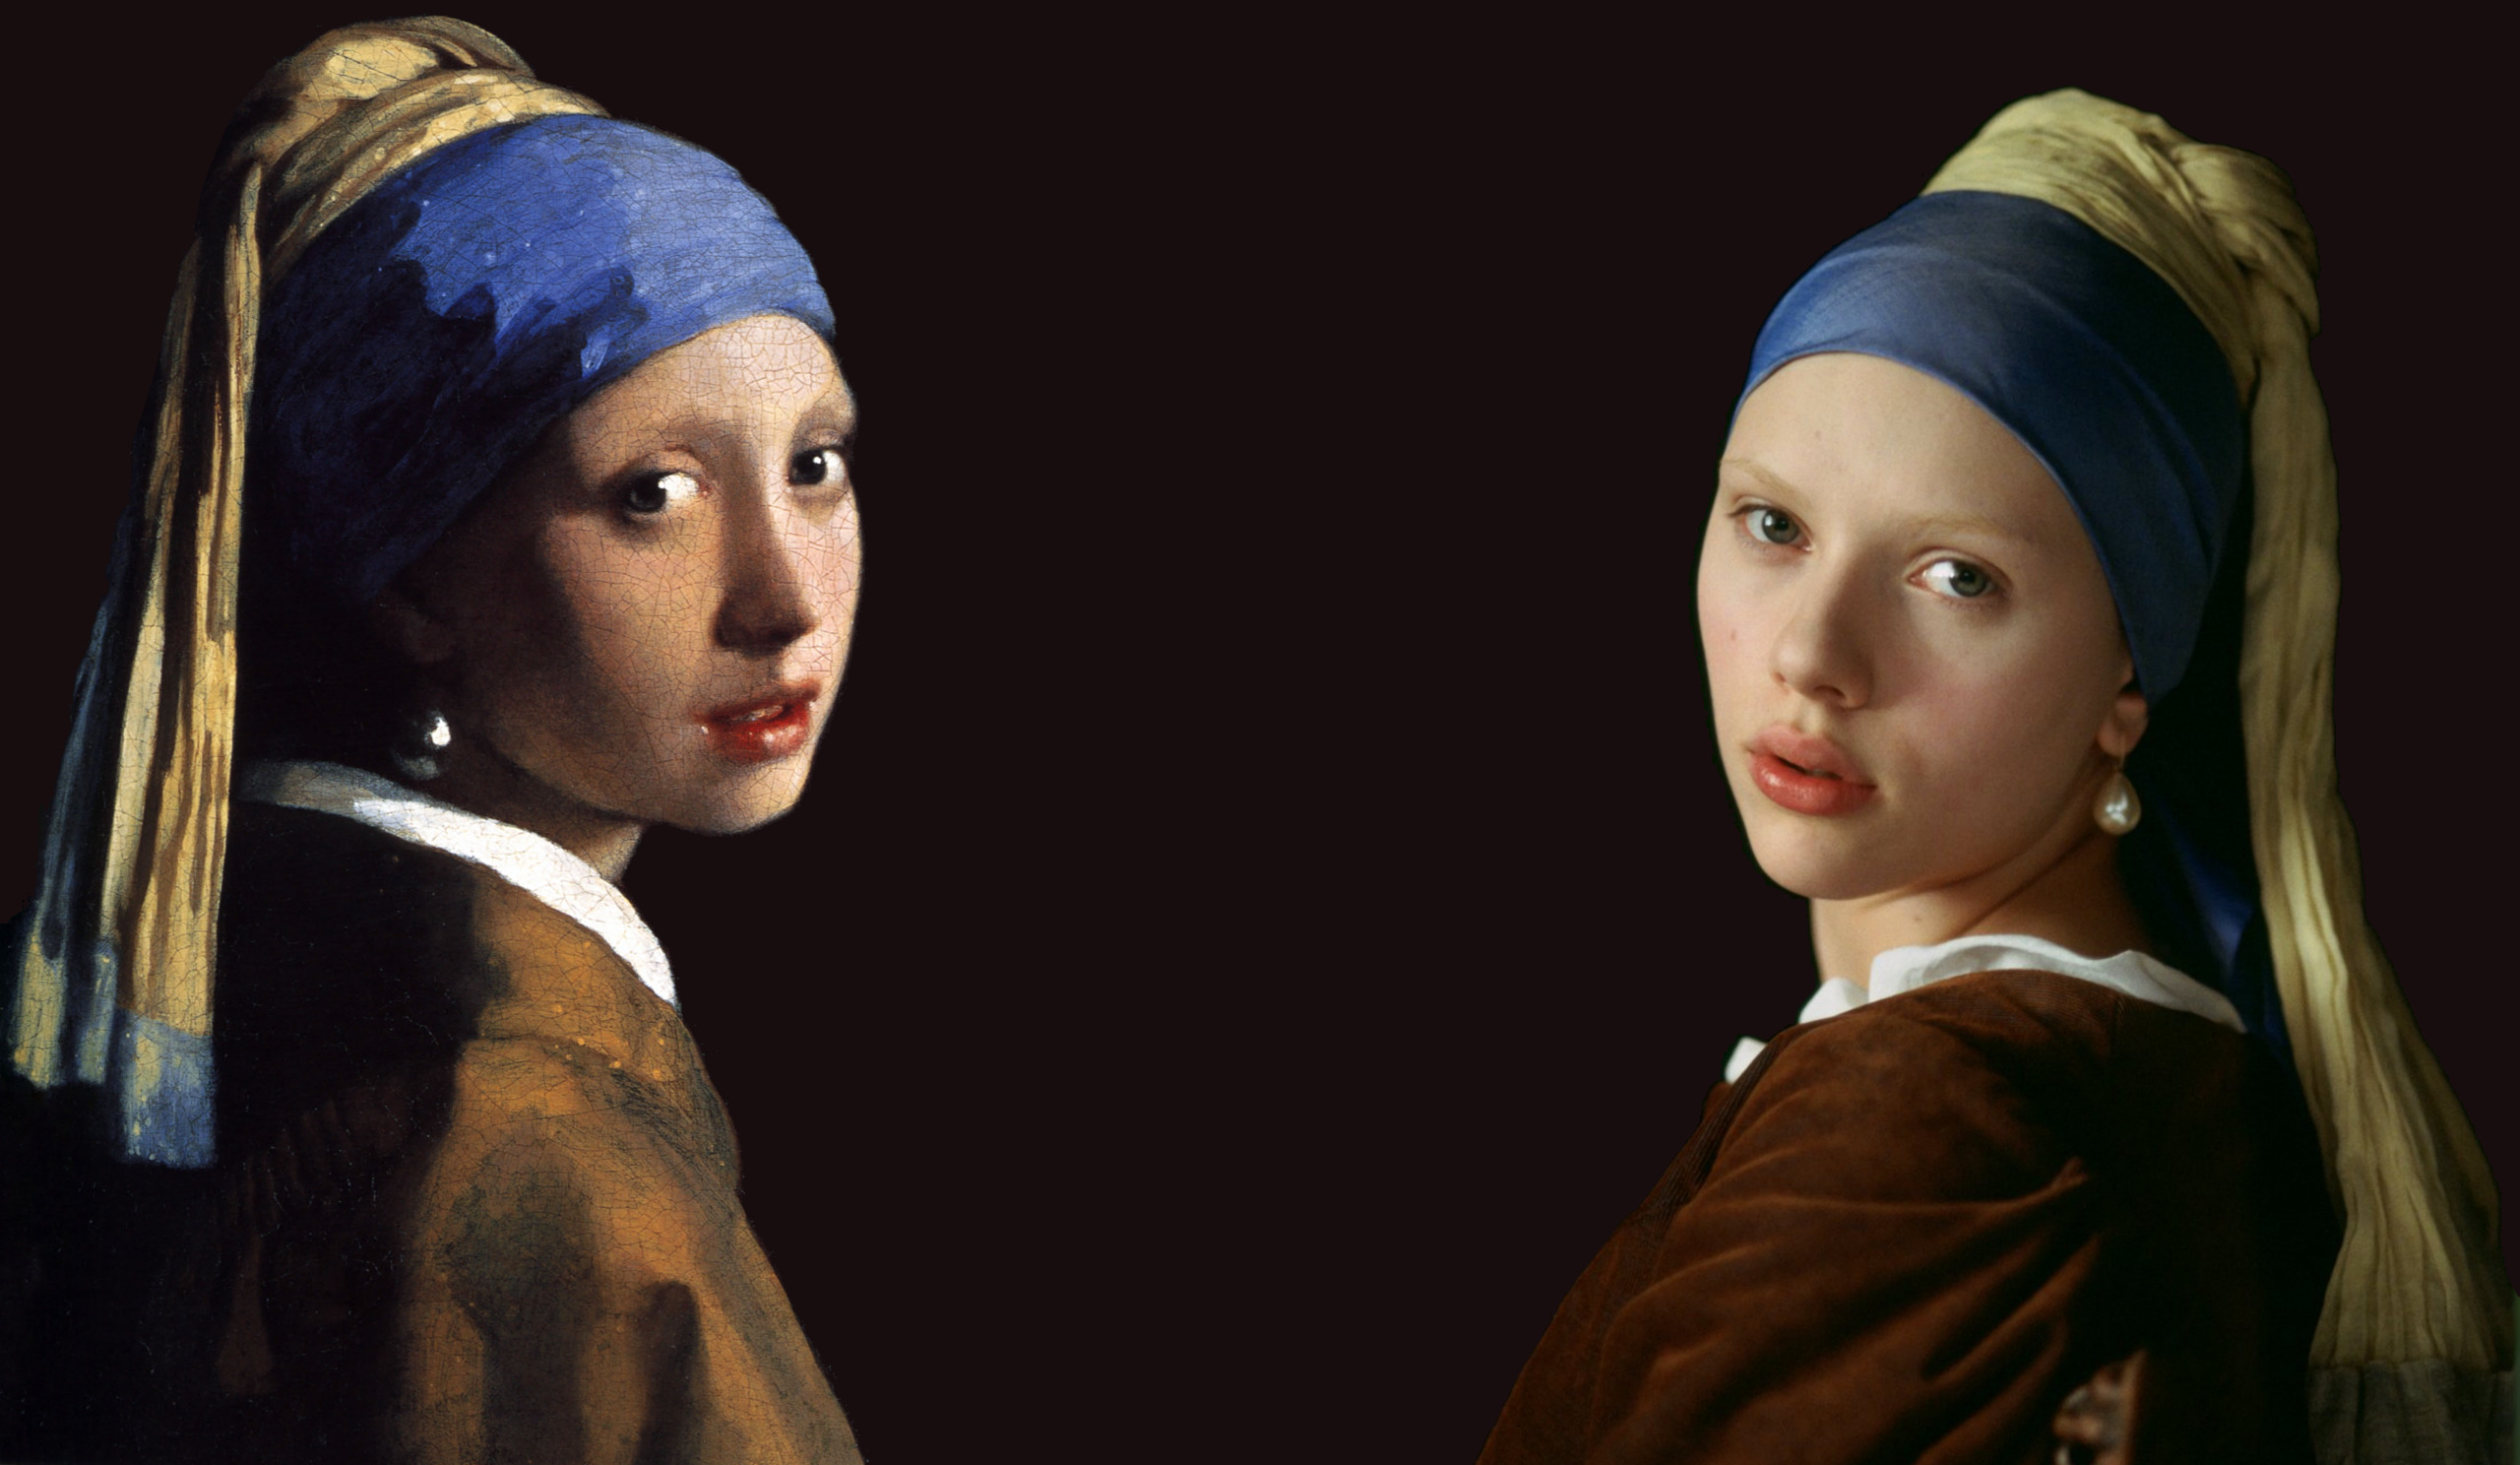 P Aintings Scarlett Johansson Artwork Johannes Vermeer The Girl With A Pearl Earring Masterpiece Mirror Famous Woman Wallpaper